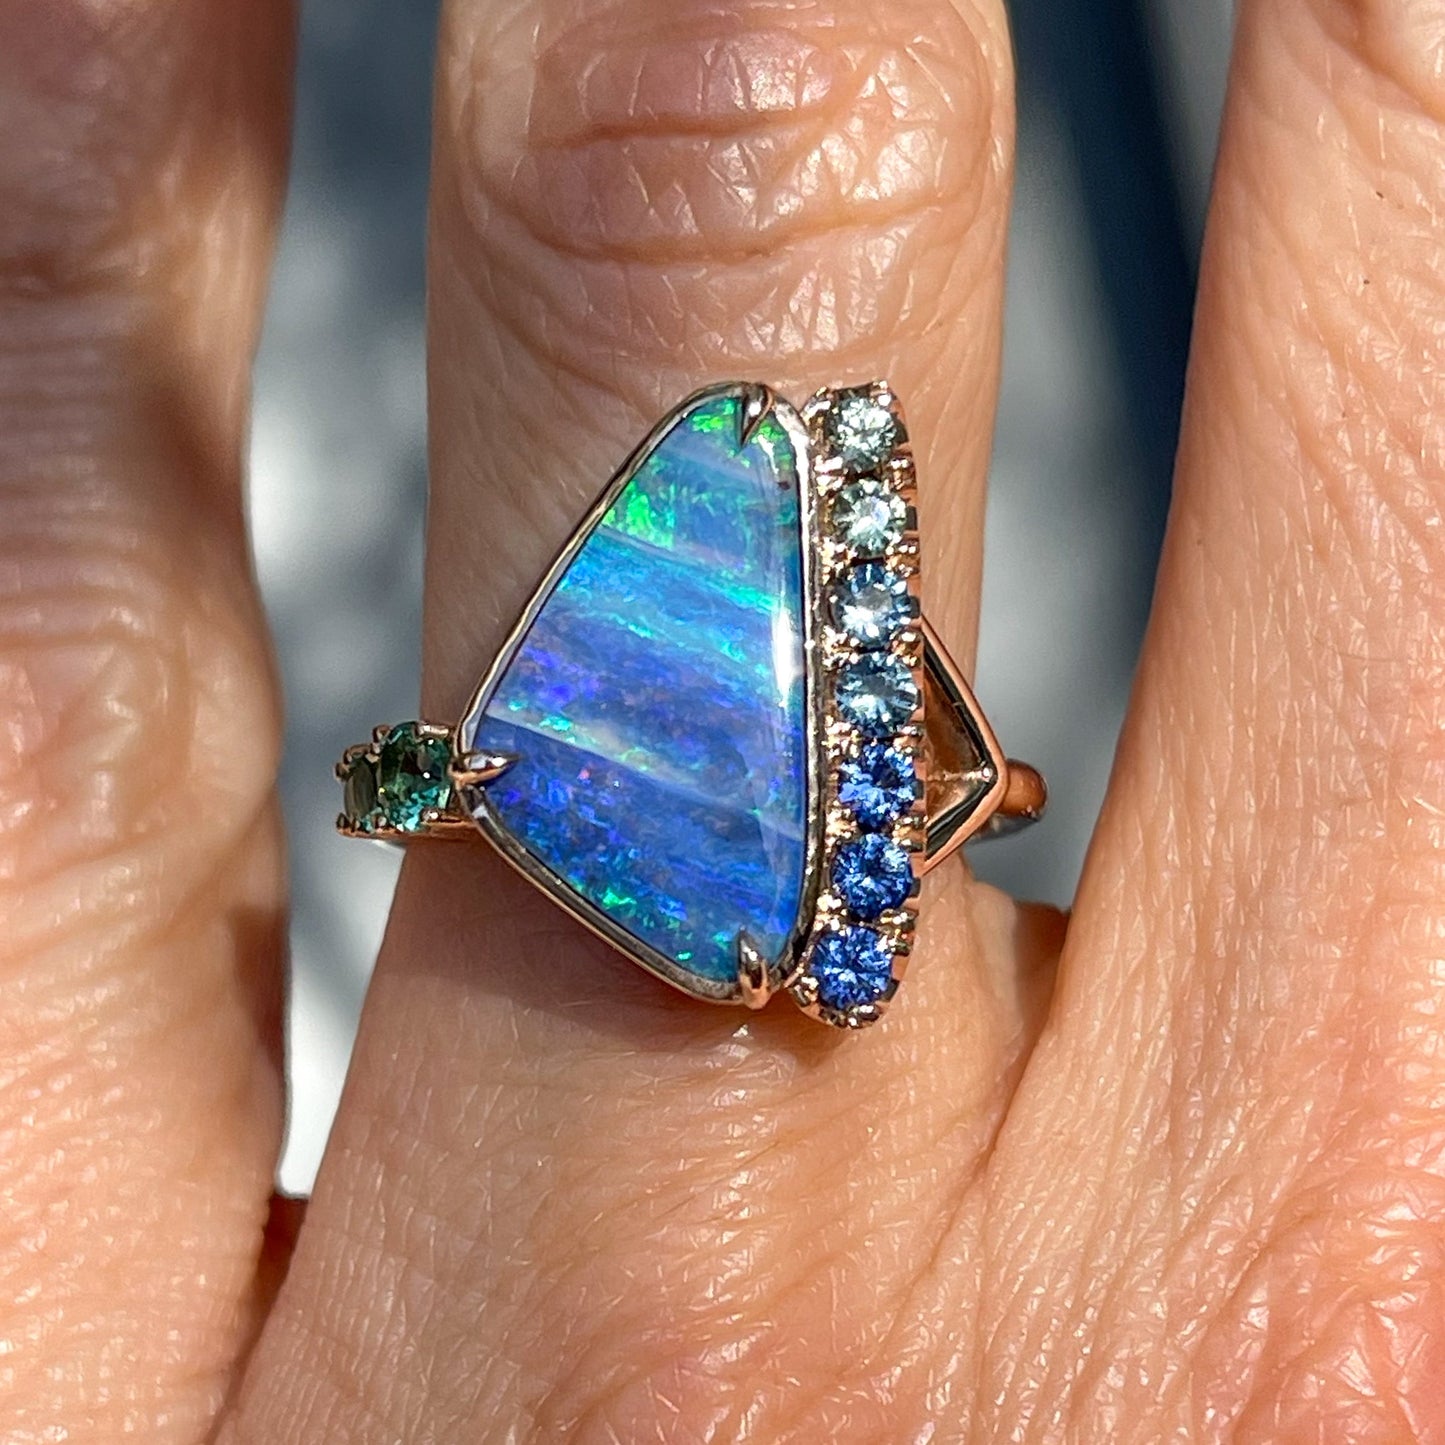 An Australian Opal Ring by NIXIN Jewelry with opal and sapphires modeled on a finger.